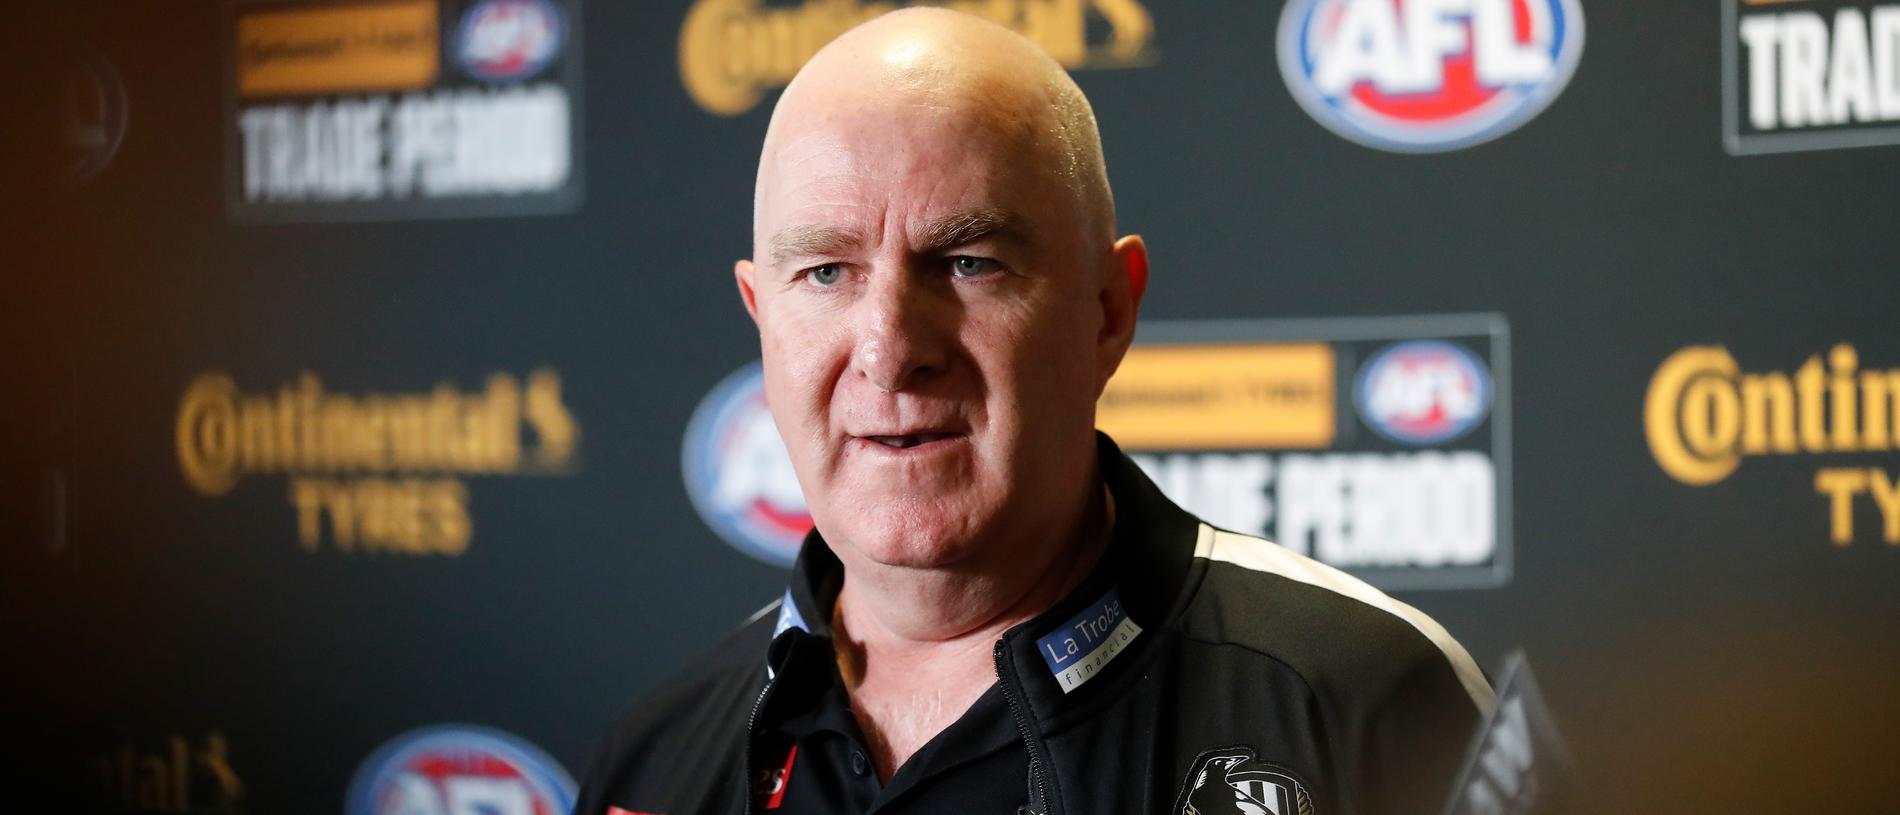 MELBOURNE, AUSTRALIA - OCTOBER 03: Graham Wright, GM of Football of the Magpies speaks with media during The 2022 Continental Tyres AFL Trade Period at Marvel Stadium on October 03, 2022 in Melbourne, Australia. (Photo by Michael Willson/AFL Photos via Getty Images)